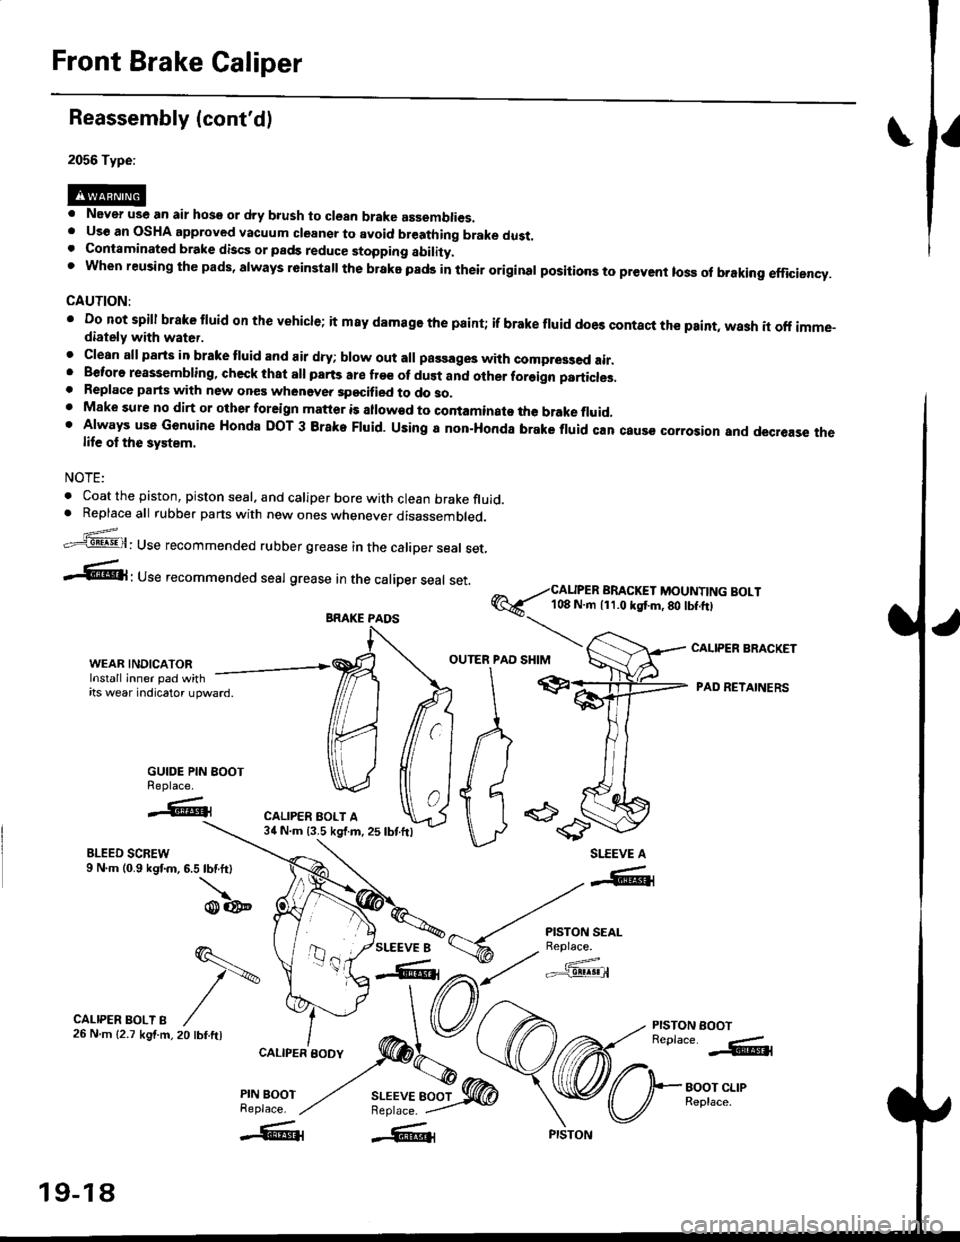 HONDA CIVIC 1997 6.G Owners Guide Front Brake Caliper
Reassembly (contd)
2056 Type:
. Never use an air hose or dry b.ush to clean brake assemblies.. Uso an OSHA approved vacuum cleansr to avoid breathing brake dust.. Contaminated bra